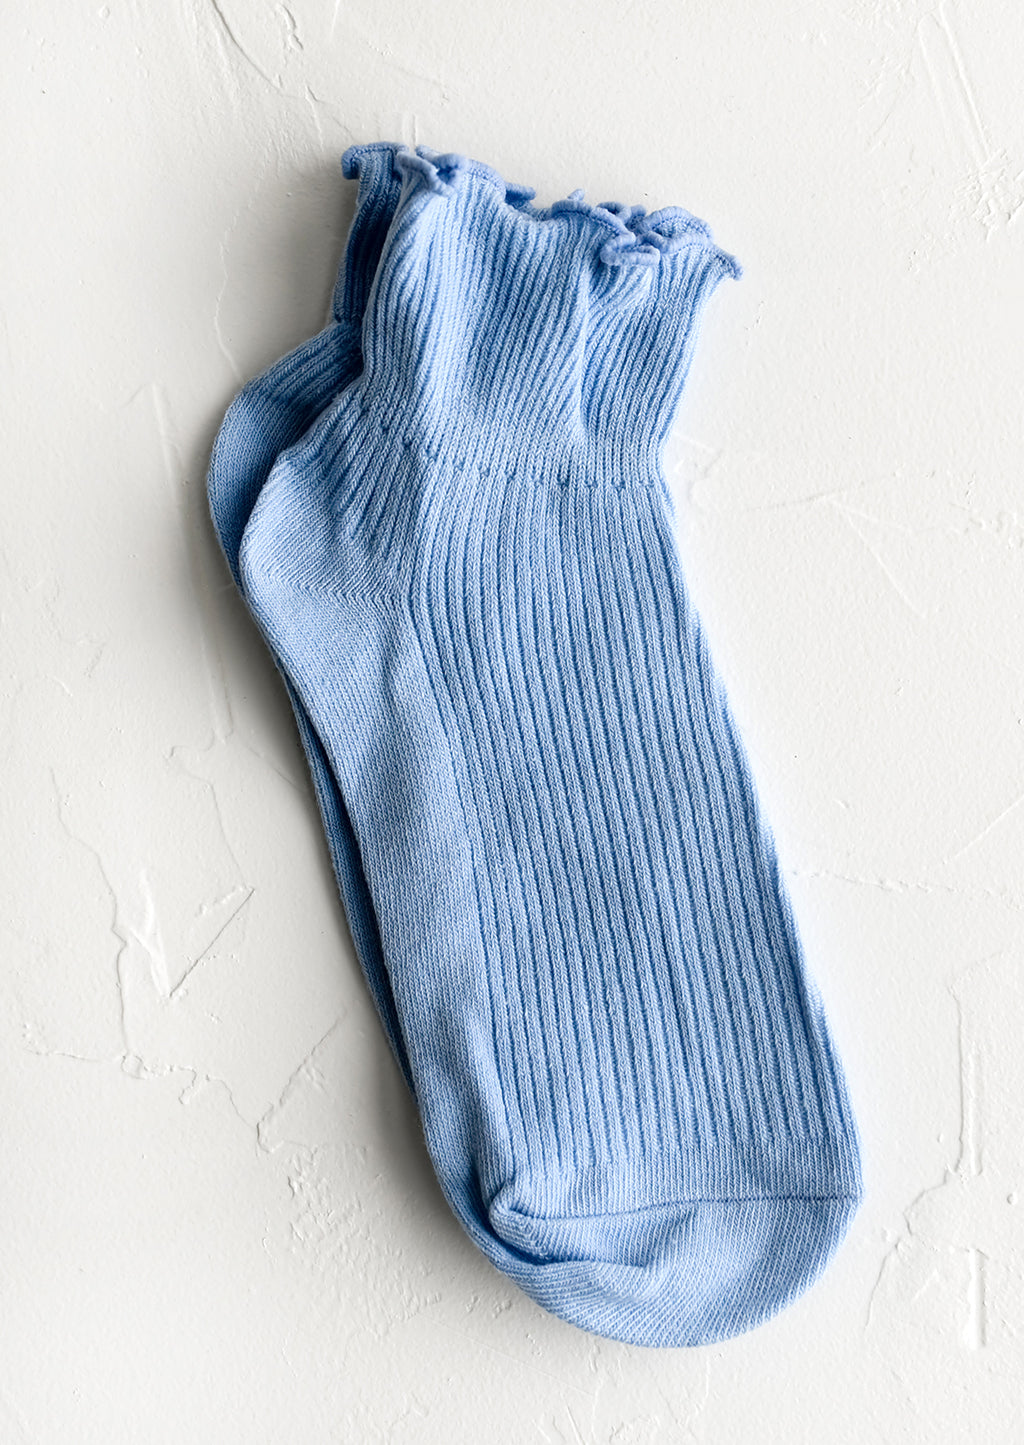 Sky: A pair of cotton ankle socks in sky blue.